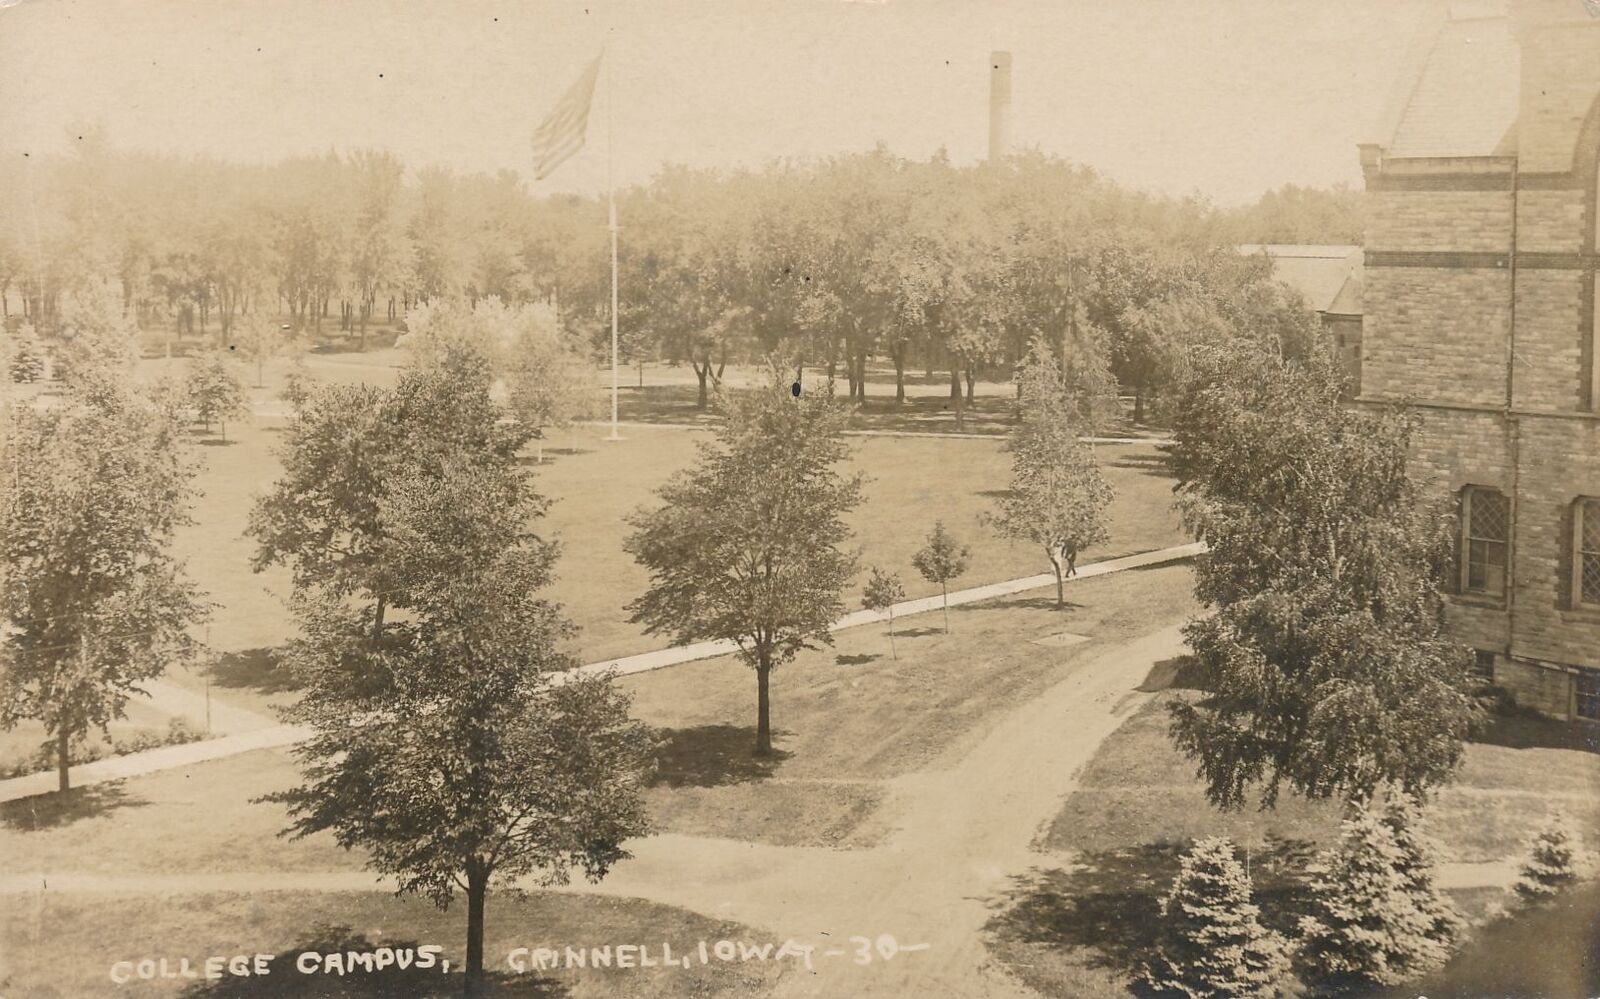 GRINNELL IA - College Campus Real Photo Postcard rppc